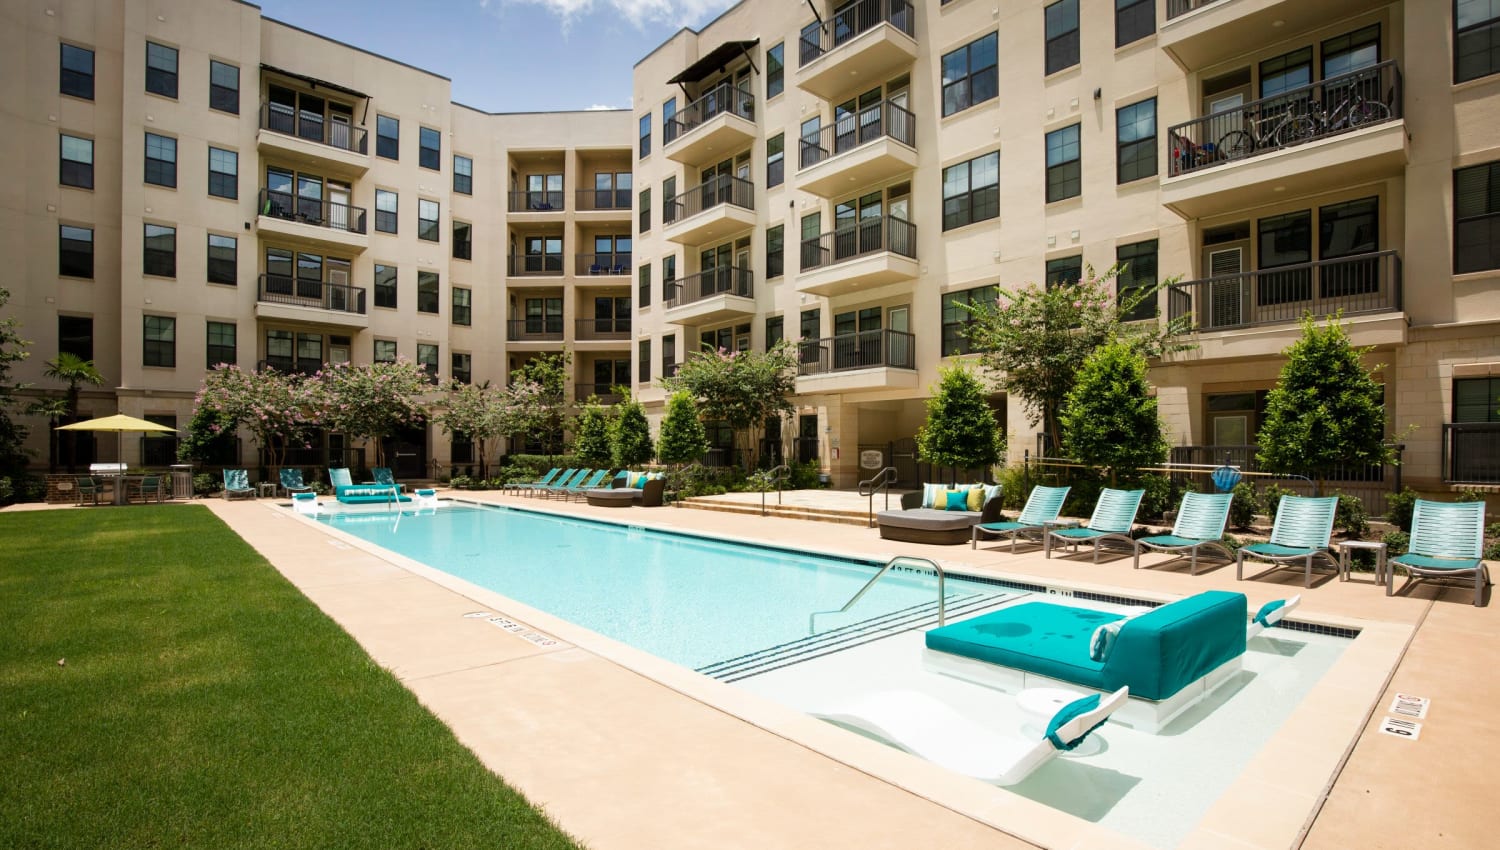 Luxurious outdoor swimming pool at Olympus at Memorial in Houston, Texas